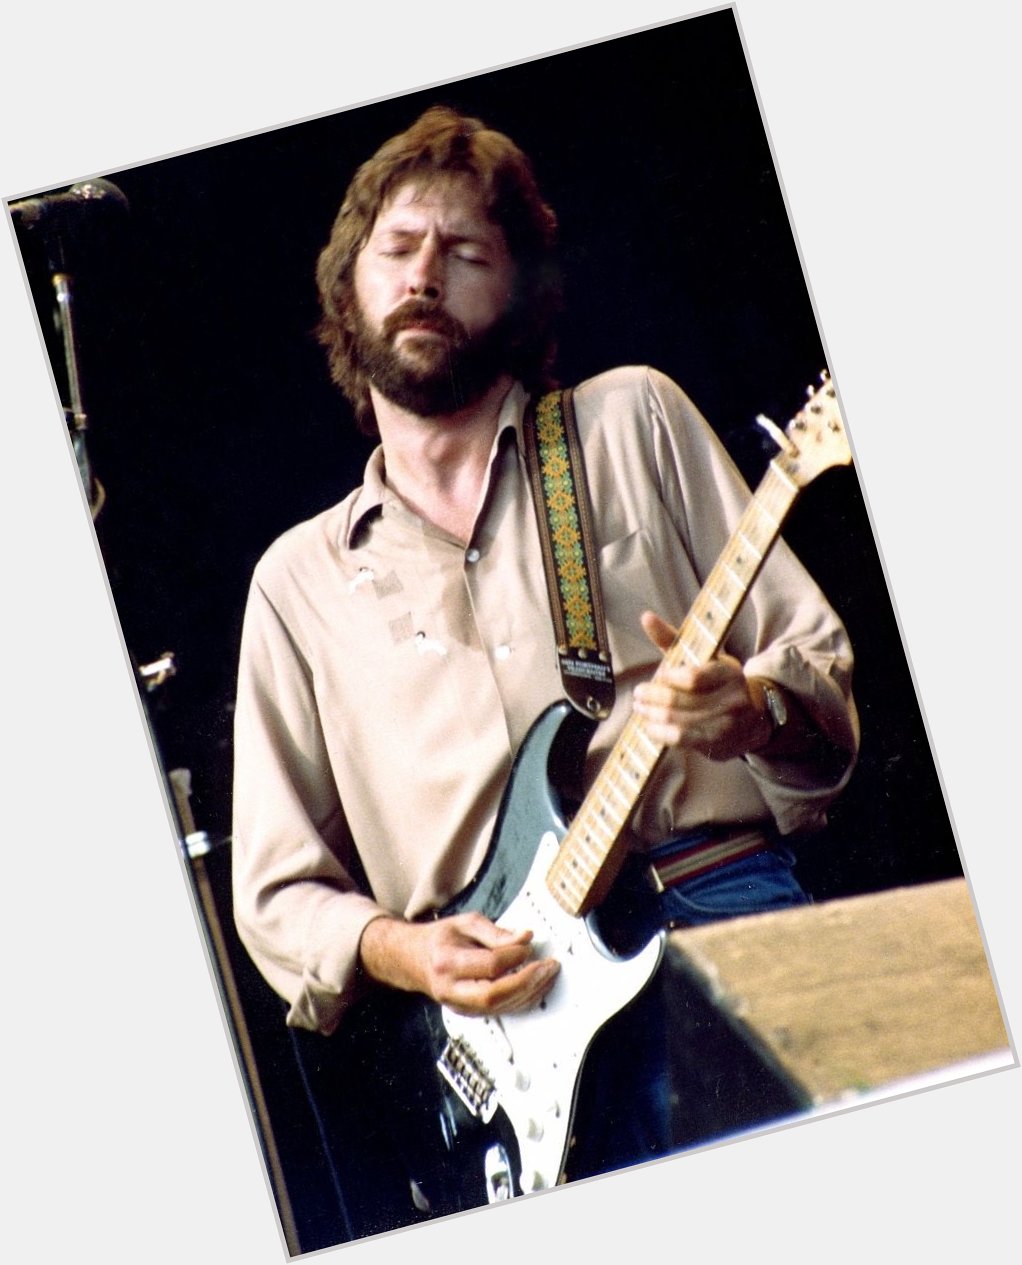 Happy 78th birthday to Slowhand Eric Clapton, who was born on this day in 1945. 